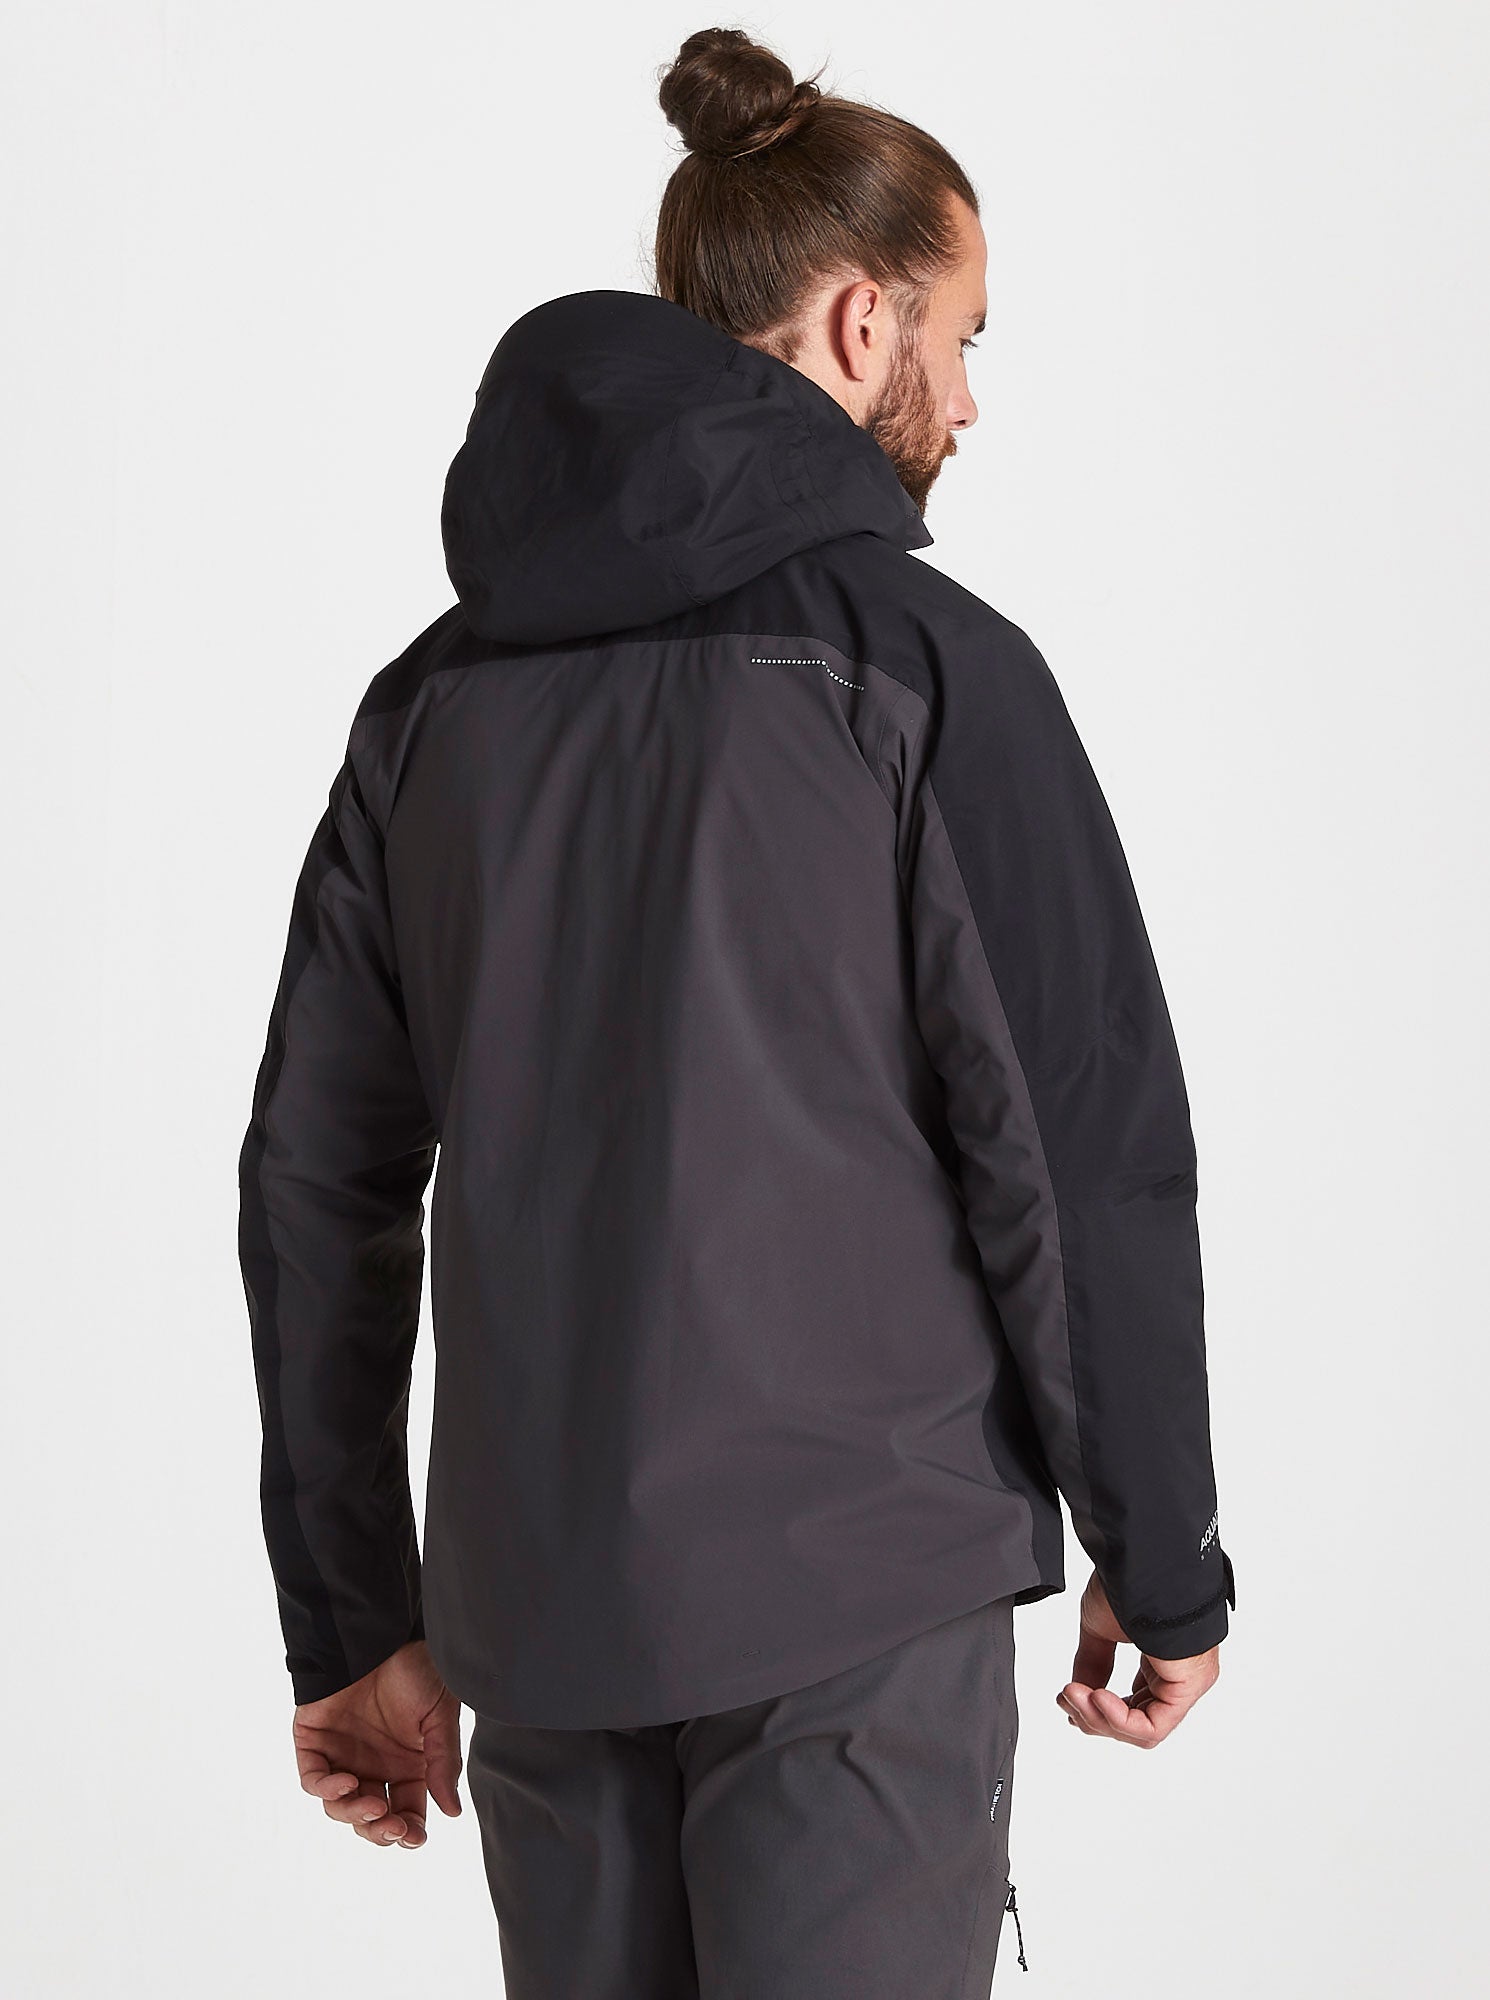 Black with Black Pepper Craghoppers Gryffin Waterproof Breathable Active Jacket